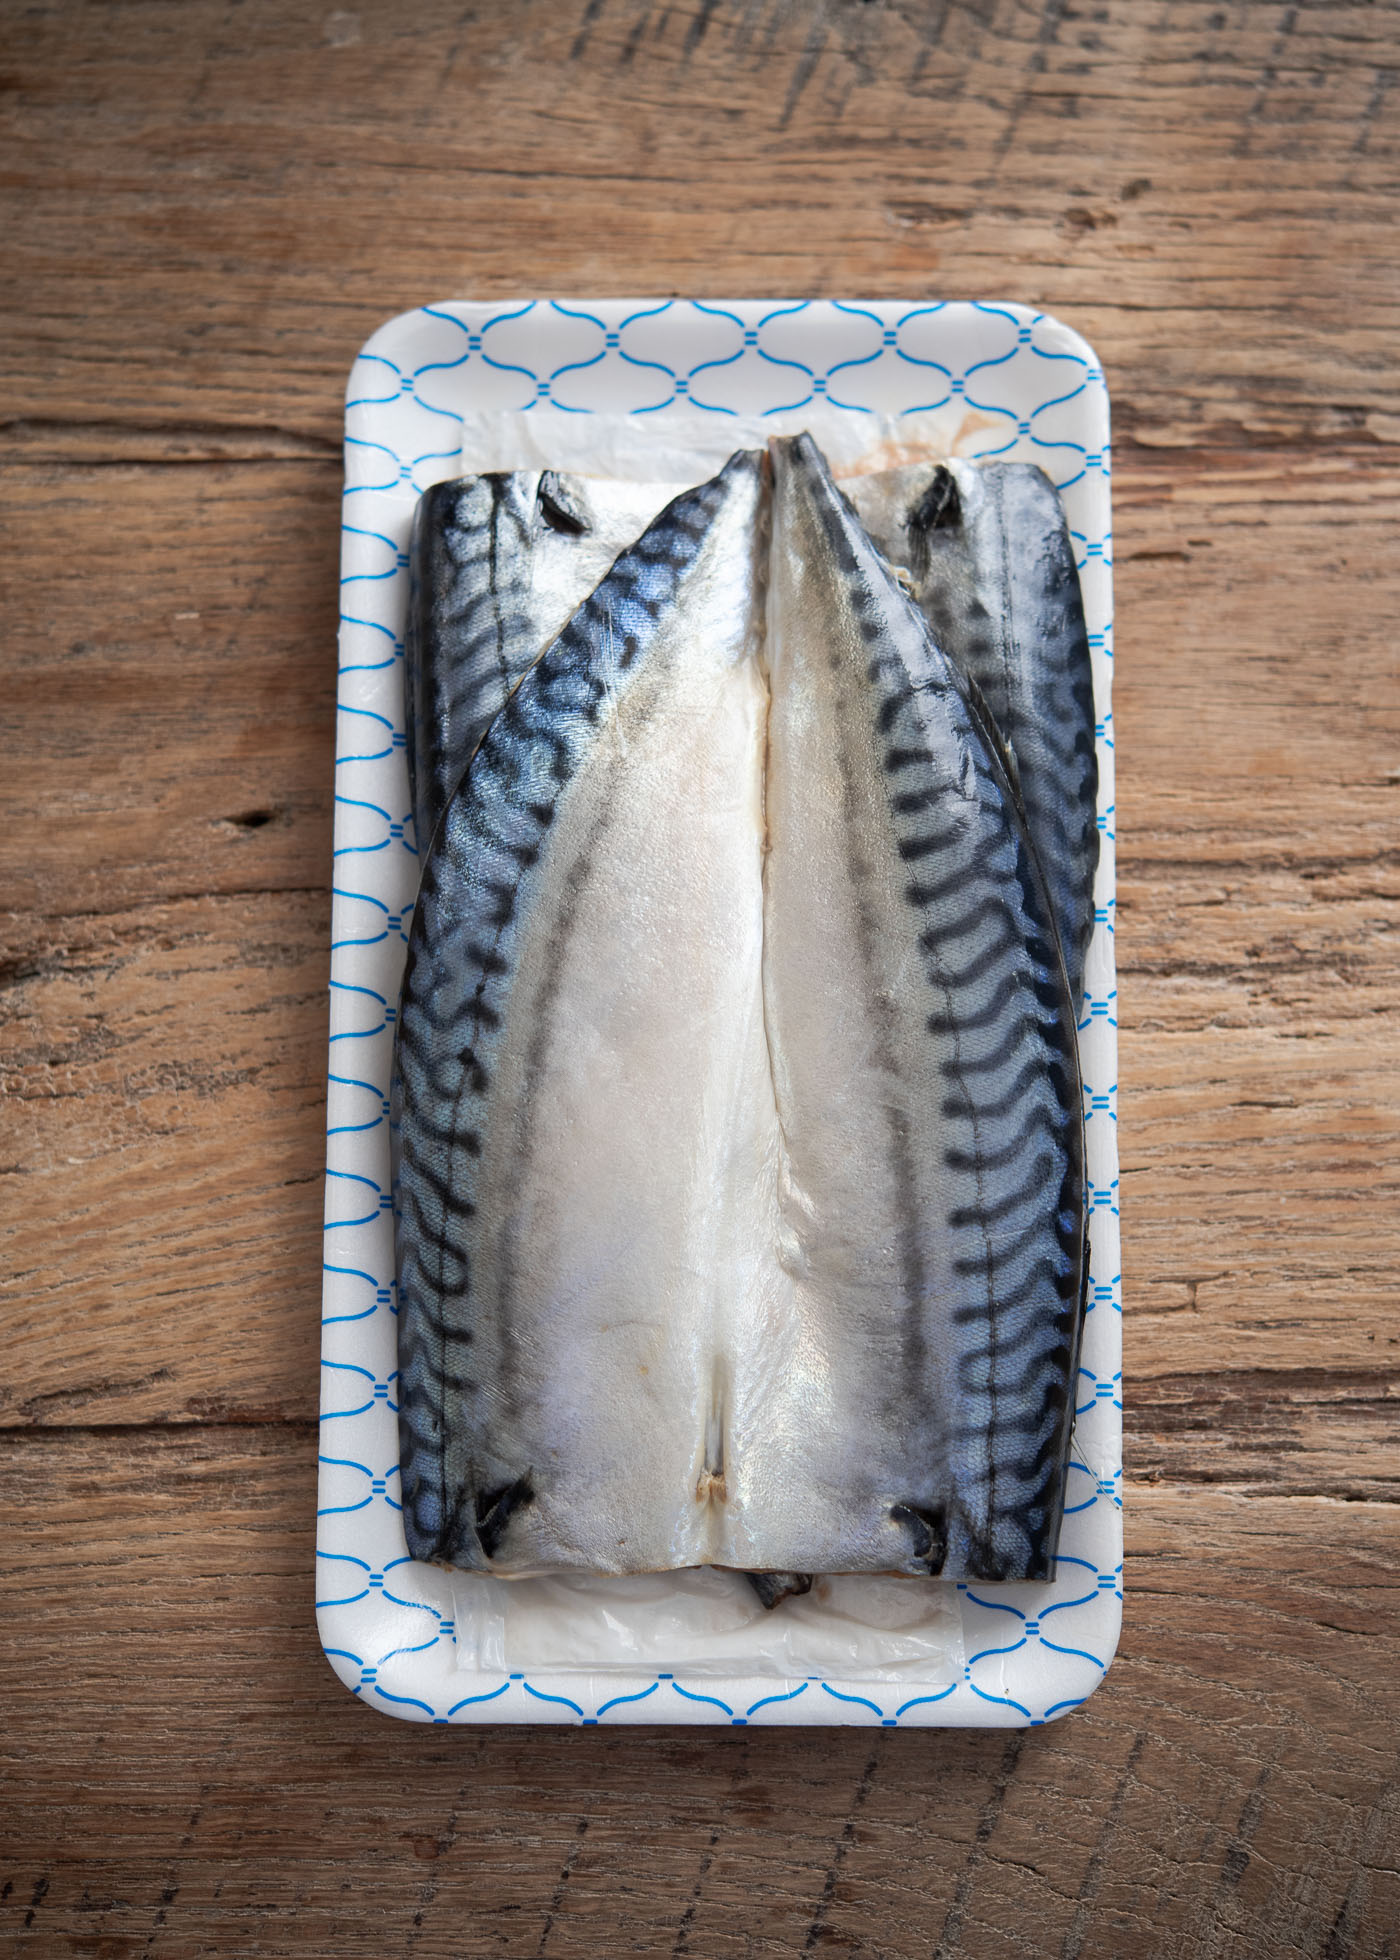 Salted mackerel fish fillets are stacked together on a plate